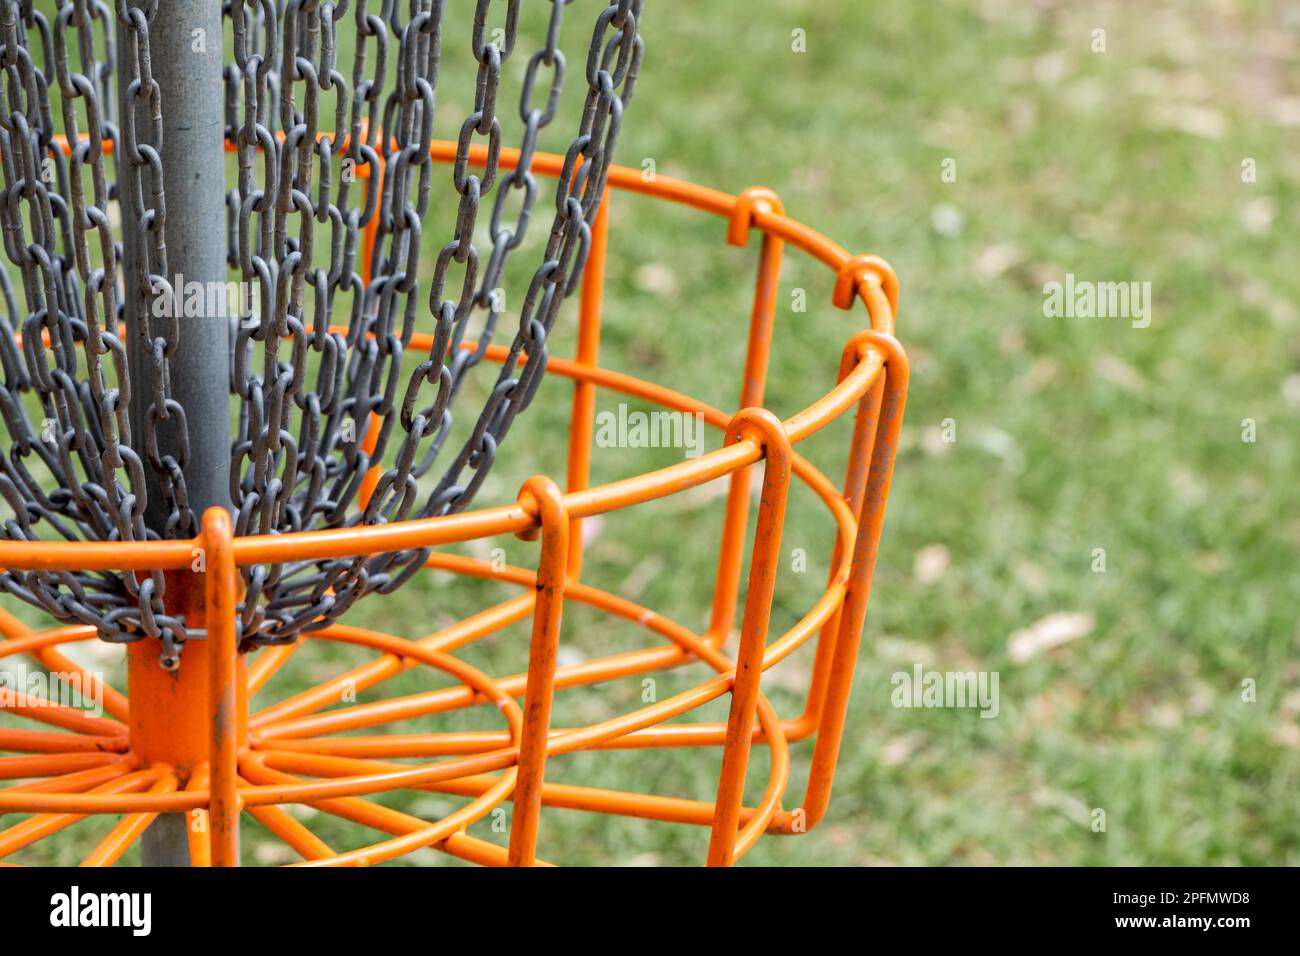 Closeup of metal disc golf basket with a shallow depth of field Stock Photo